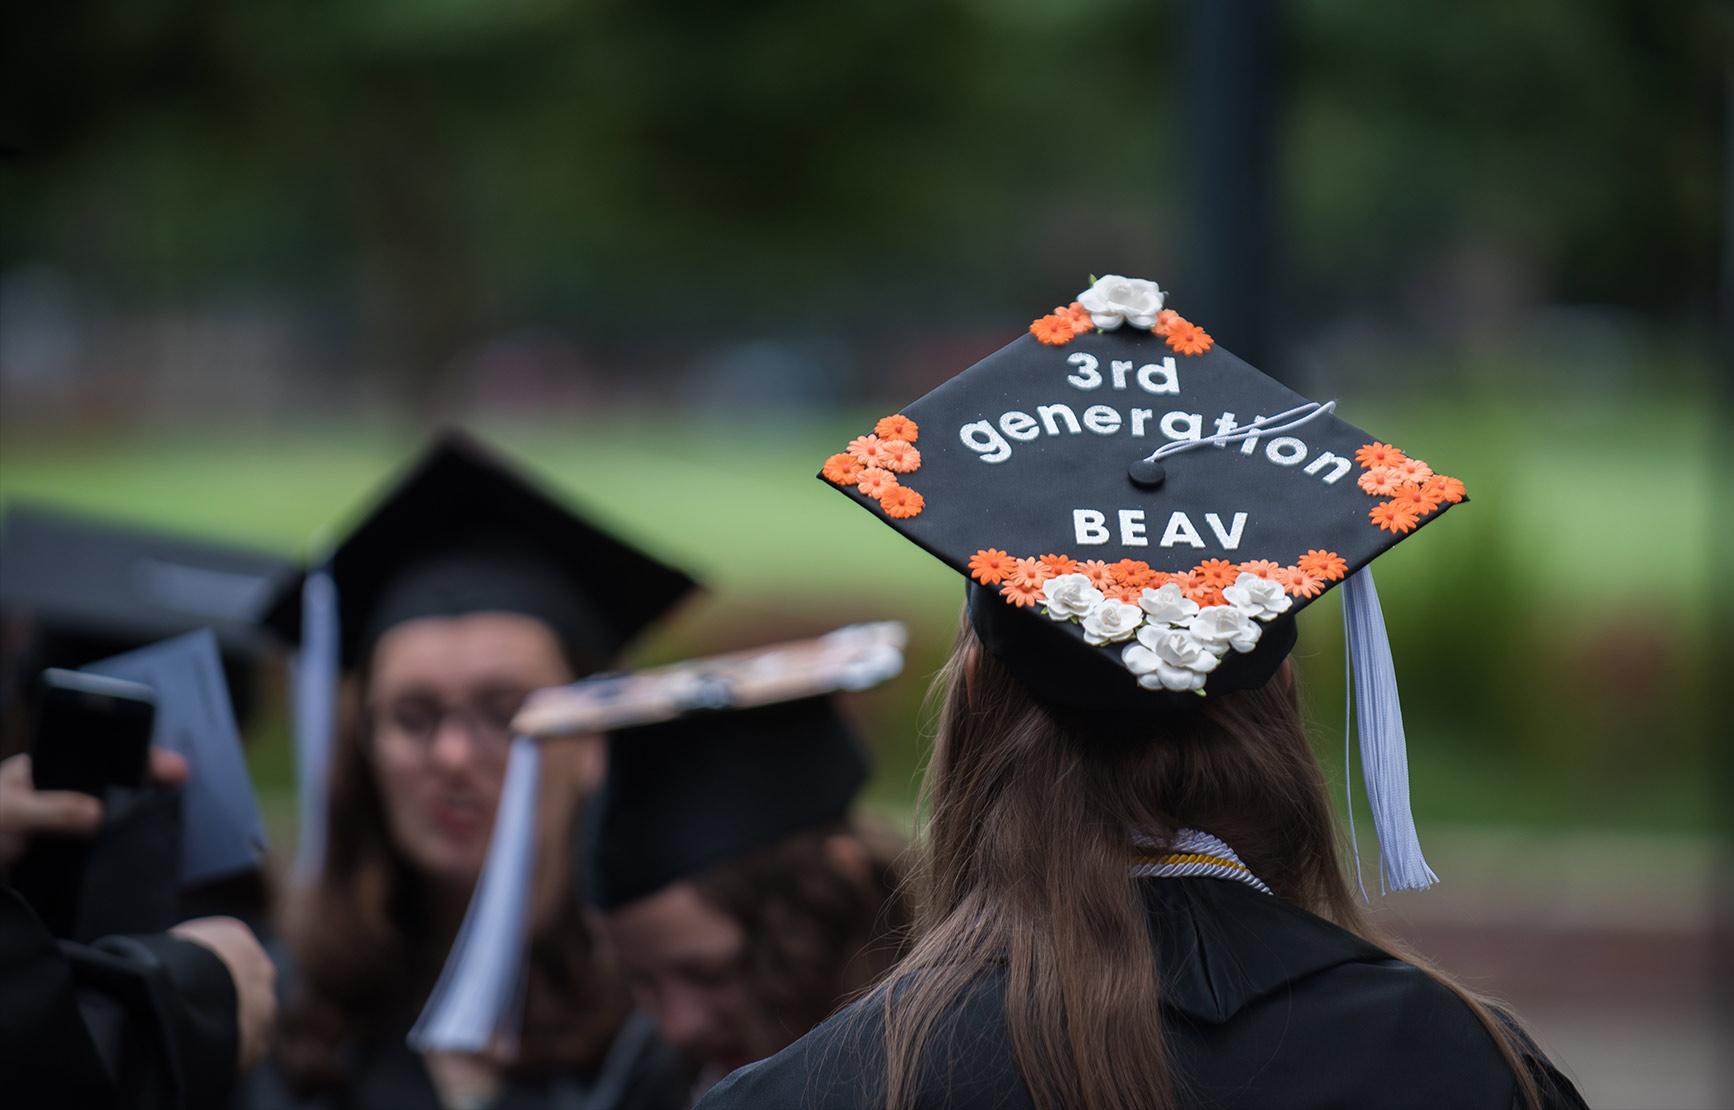 Graduating student in crowd of graduates, wearing a grad cap with "3rd generation BEAV" written on with flower decorations.